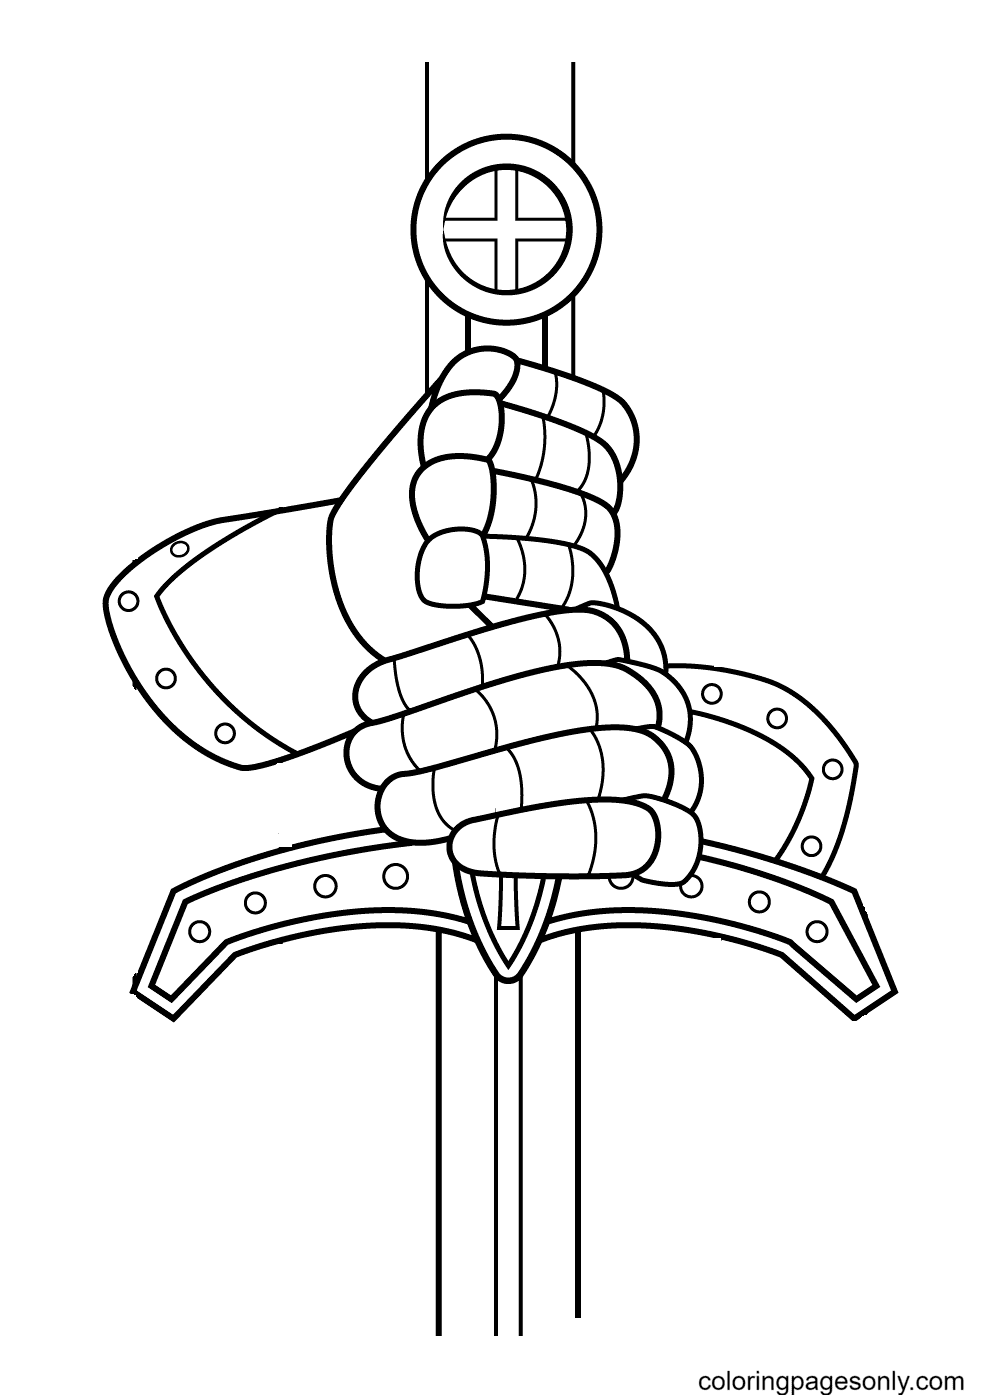 Knight Coloring Pages Printable for Free Download